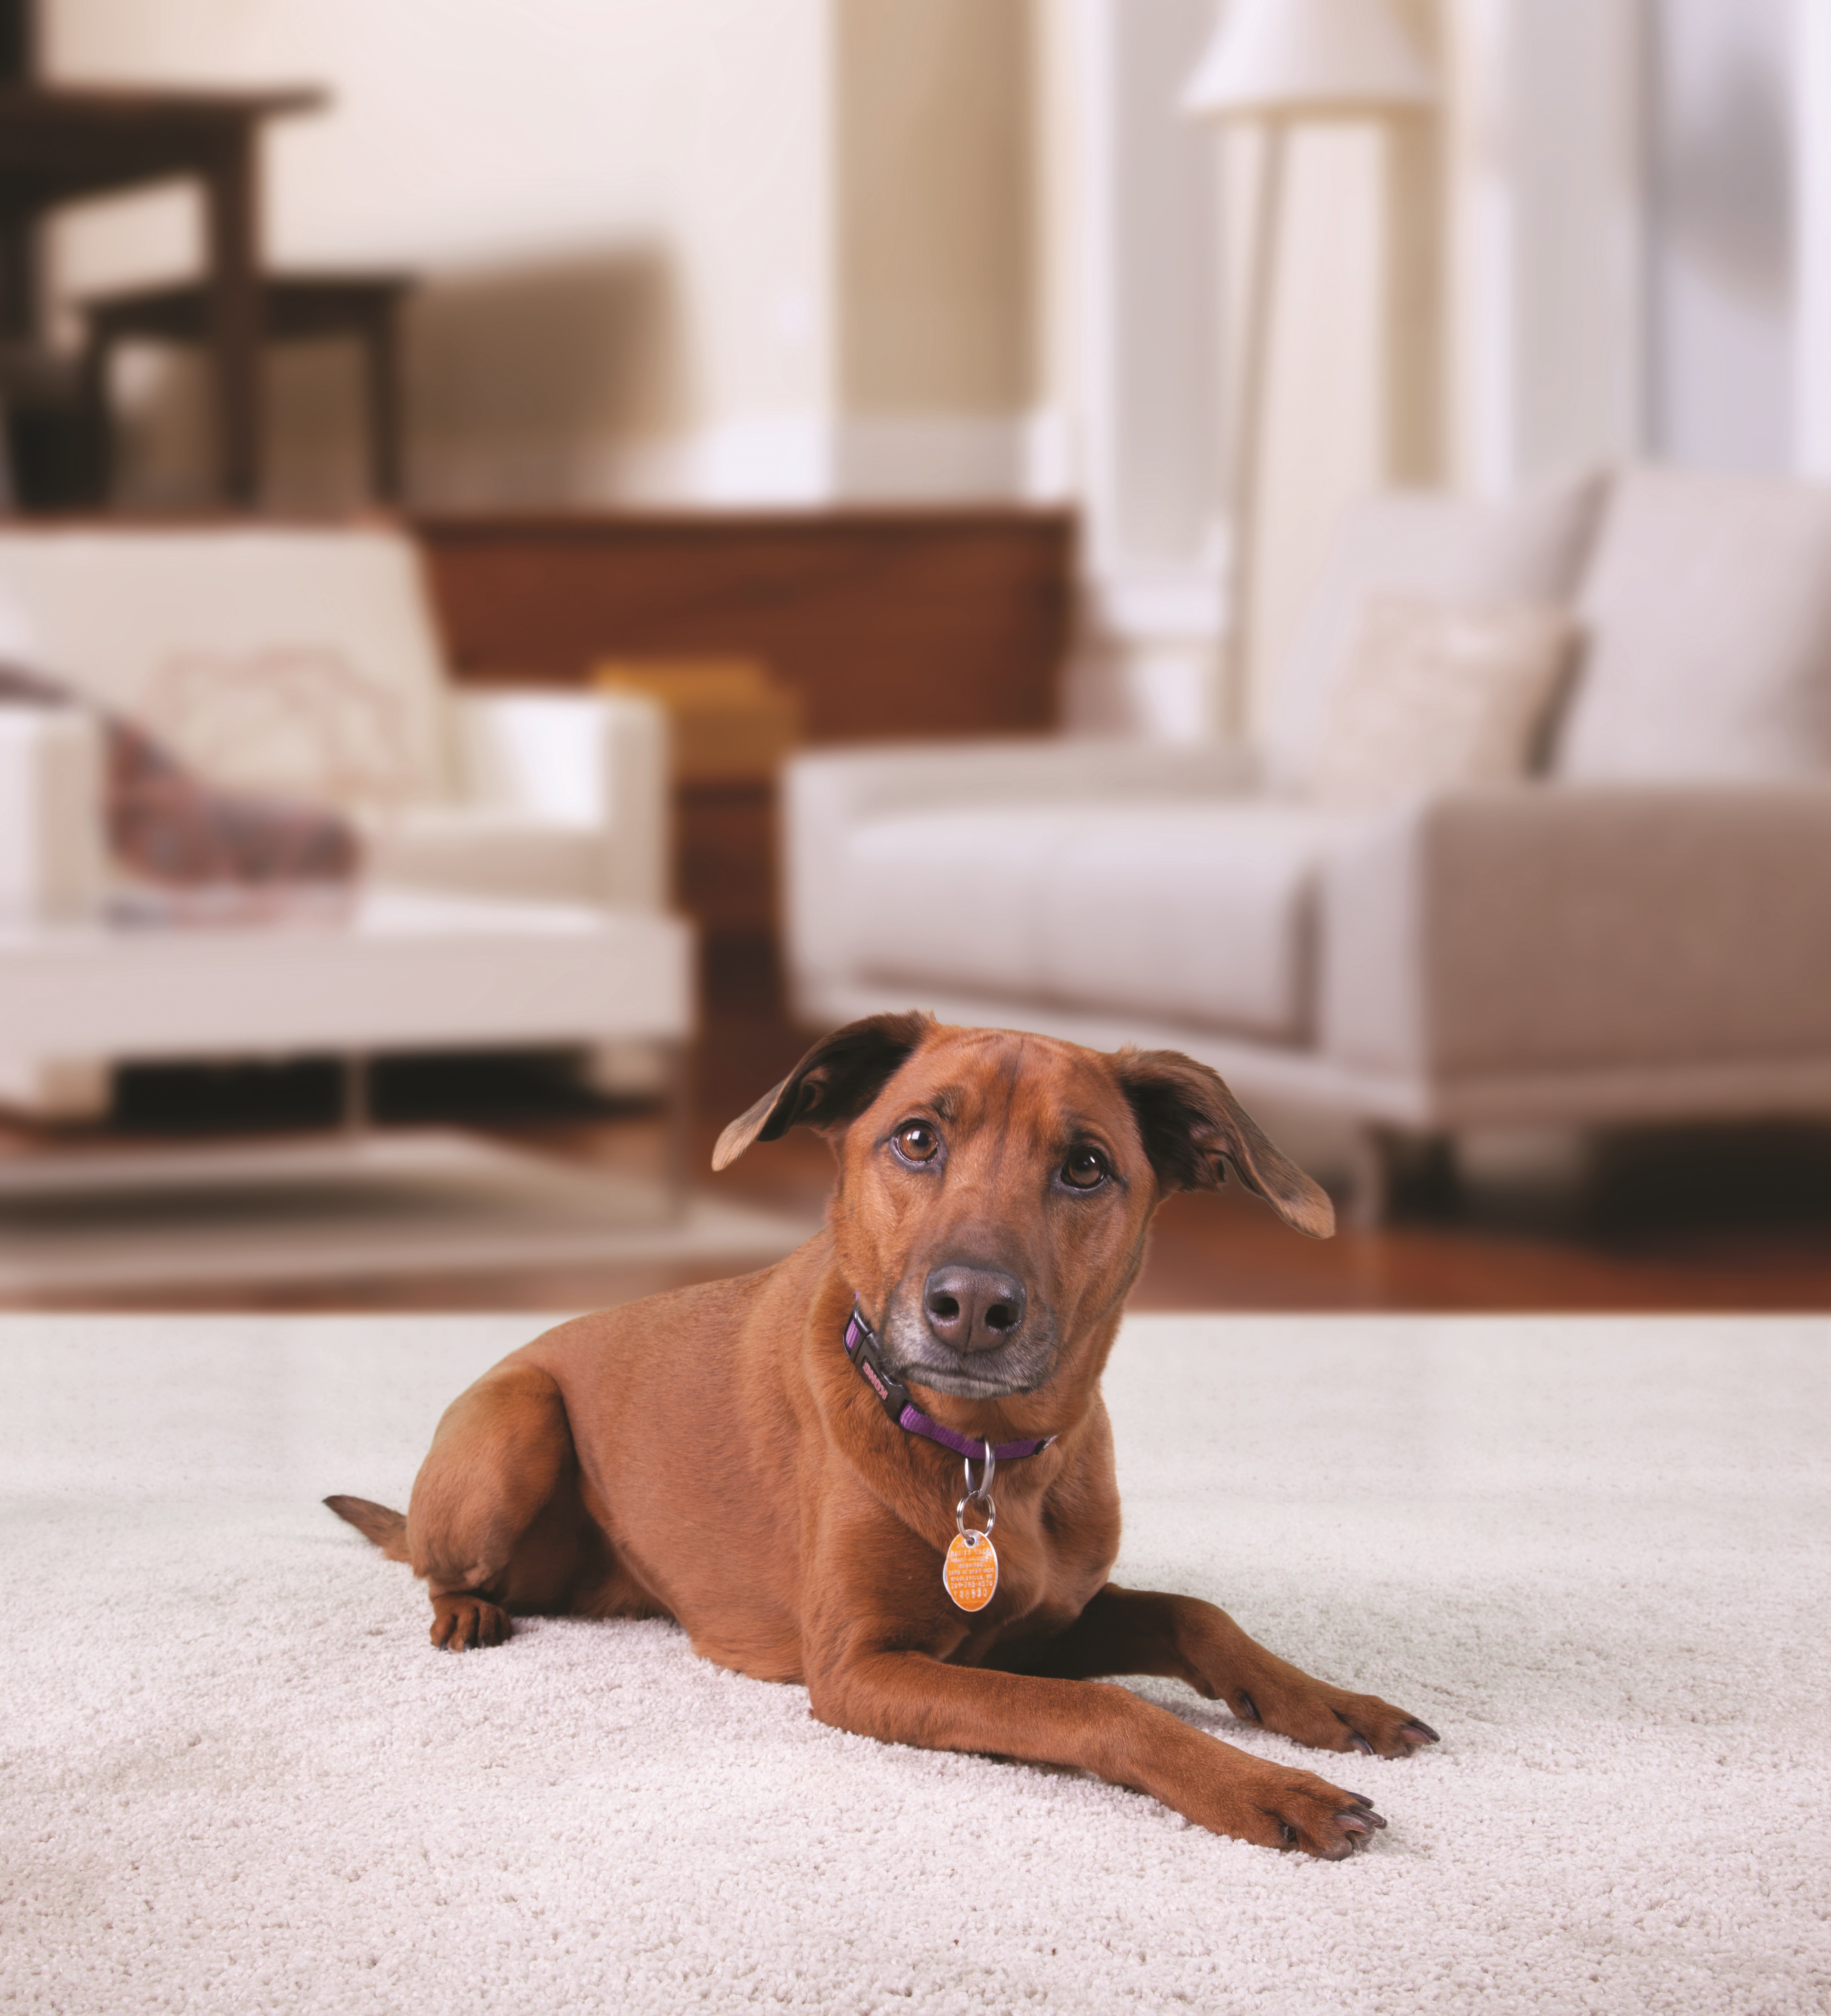 What Not To Do! BISSELL Pawsitively Clean shares the top 4 things not to do while deep cleaning.